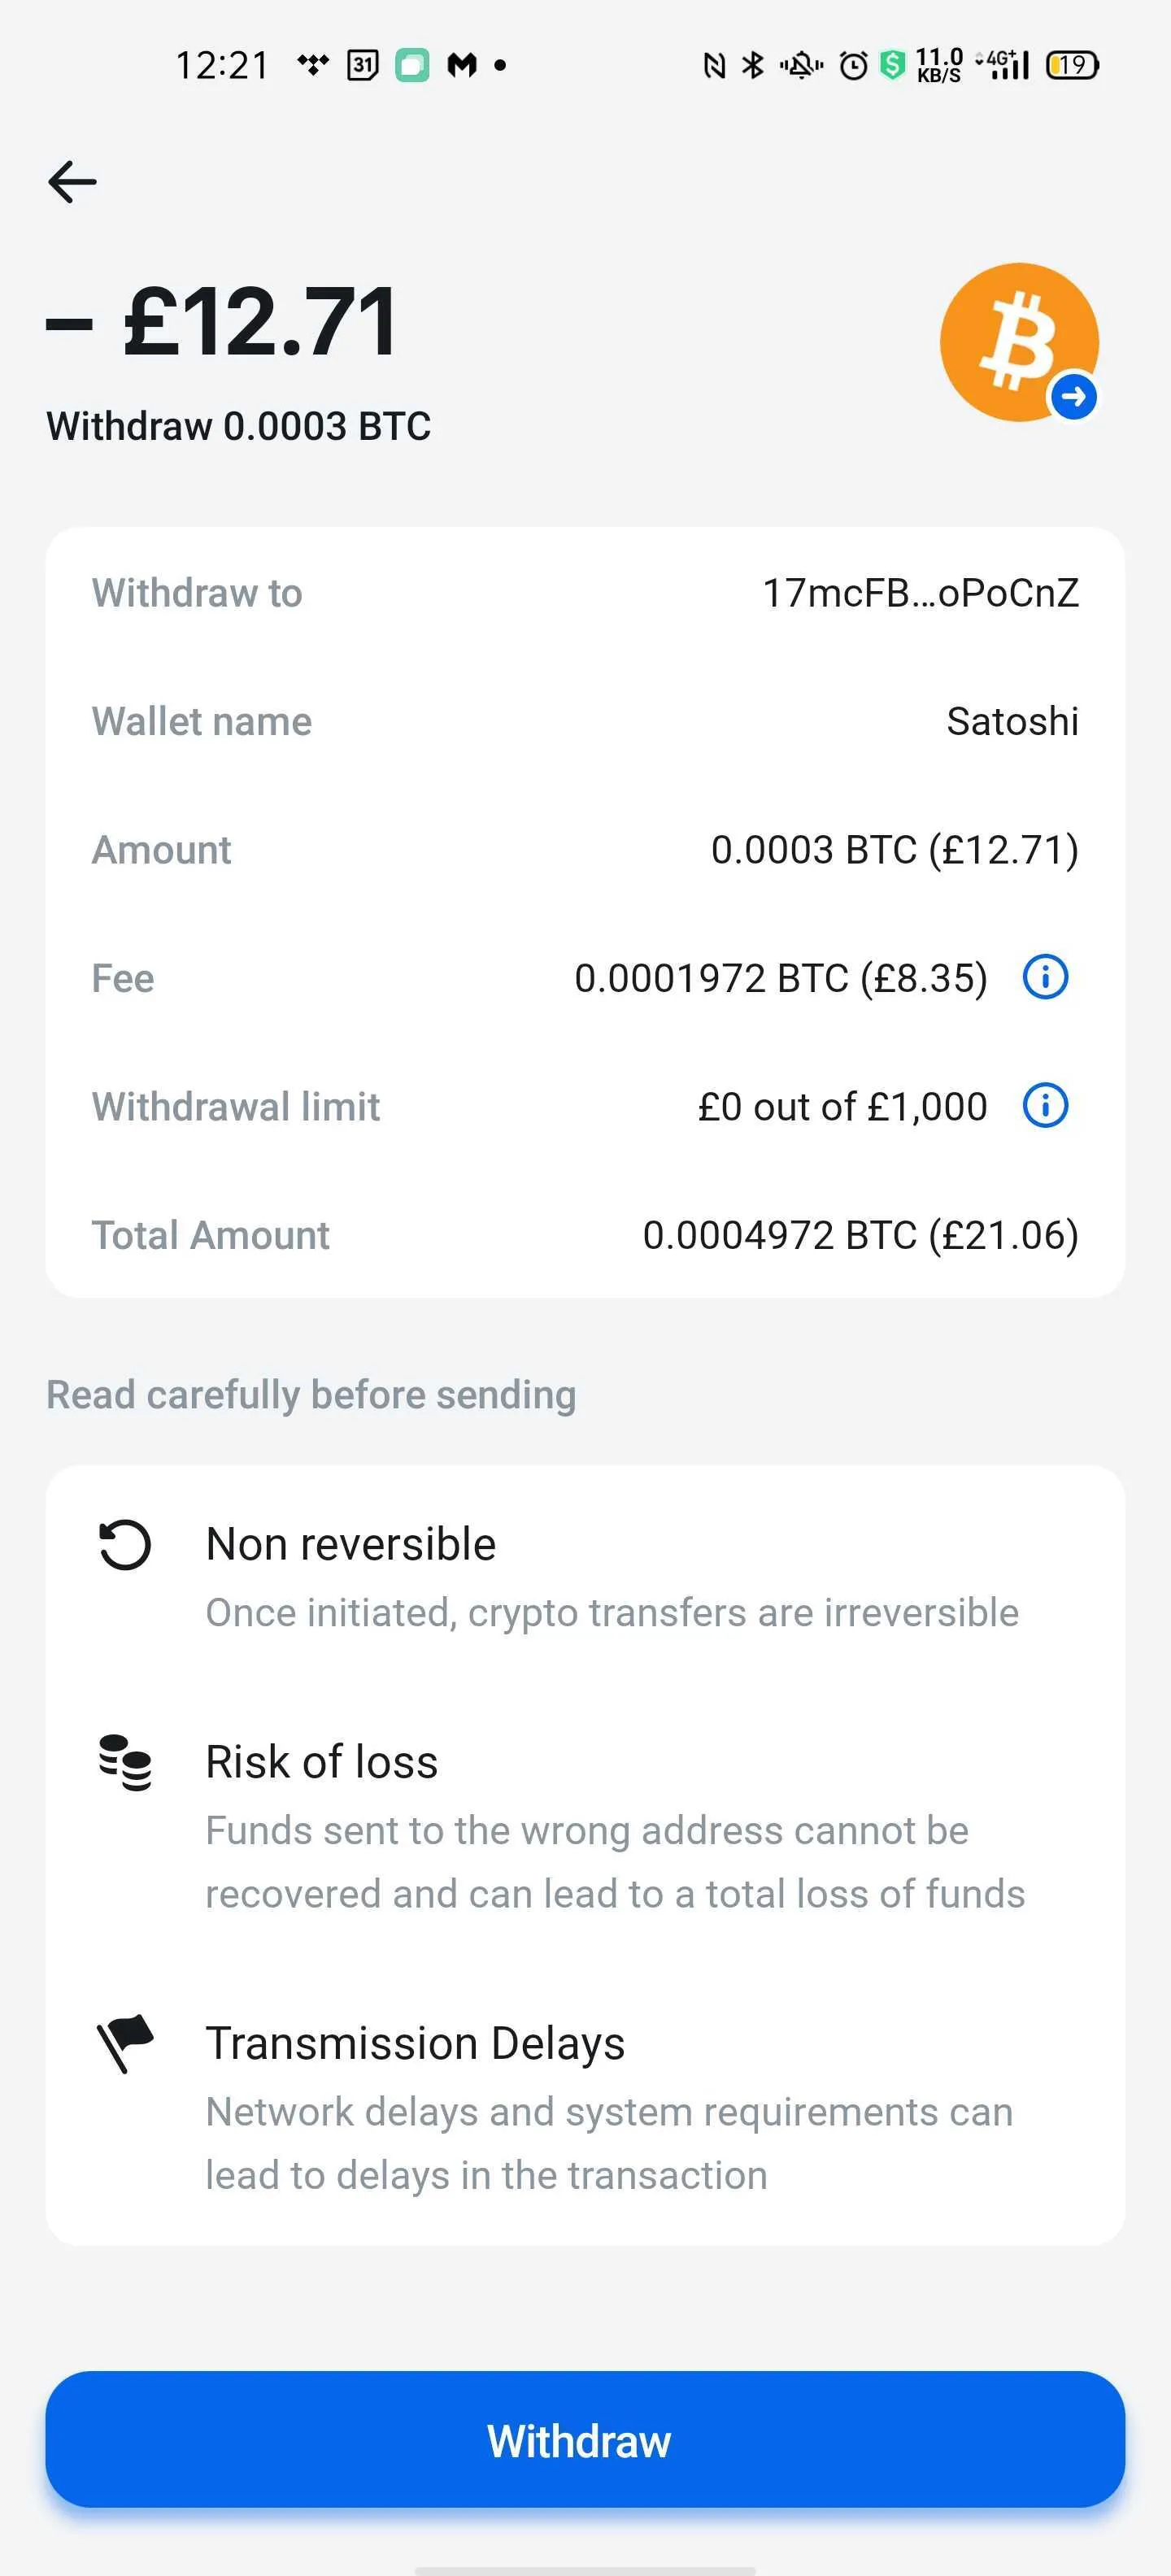 How to Buy Cryptocurrency Using Revolut